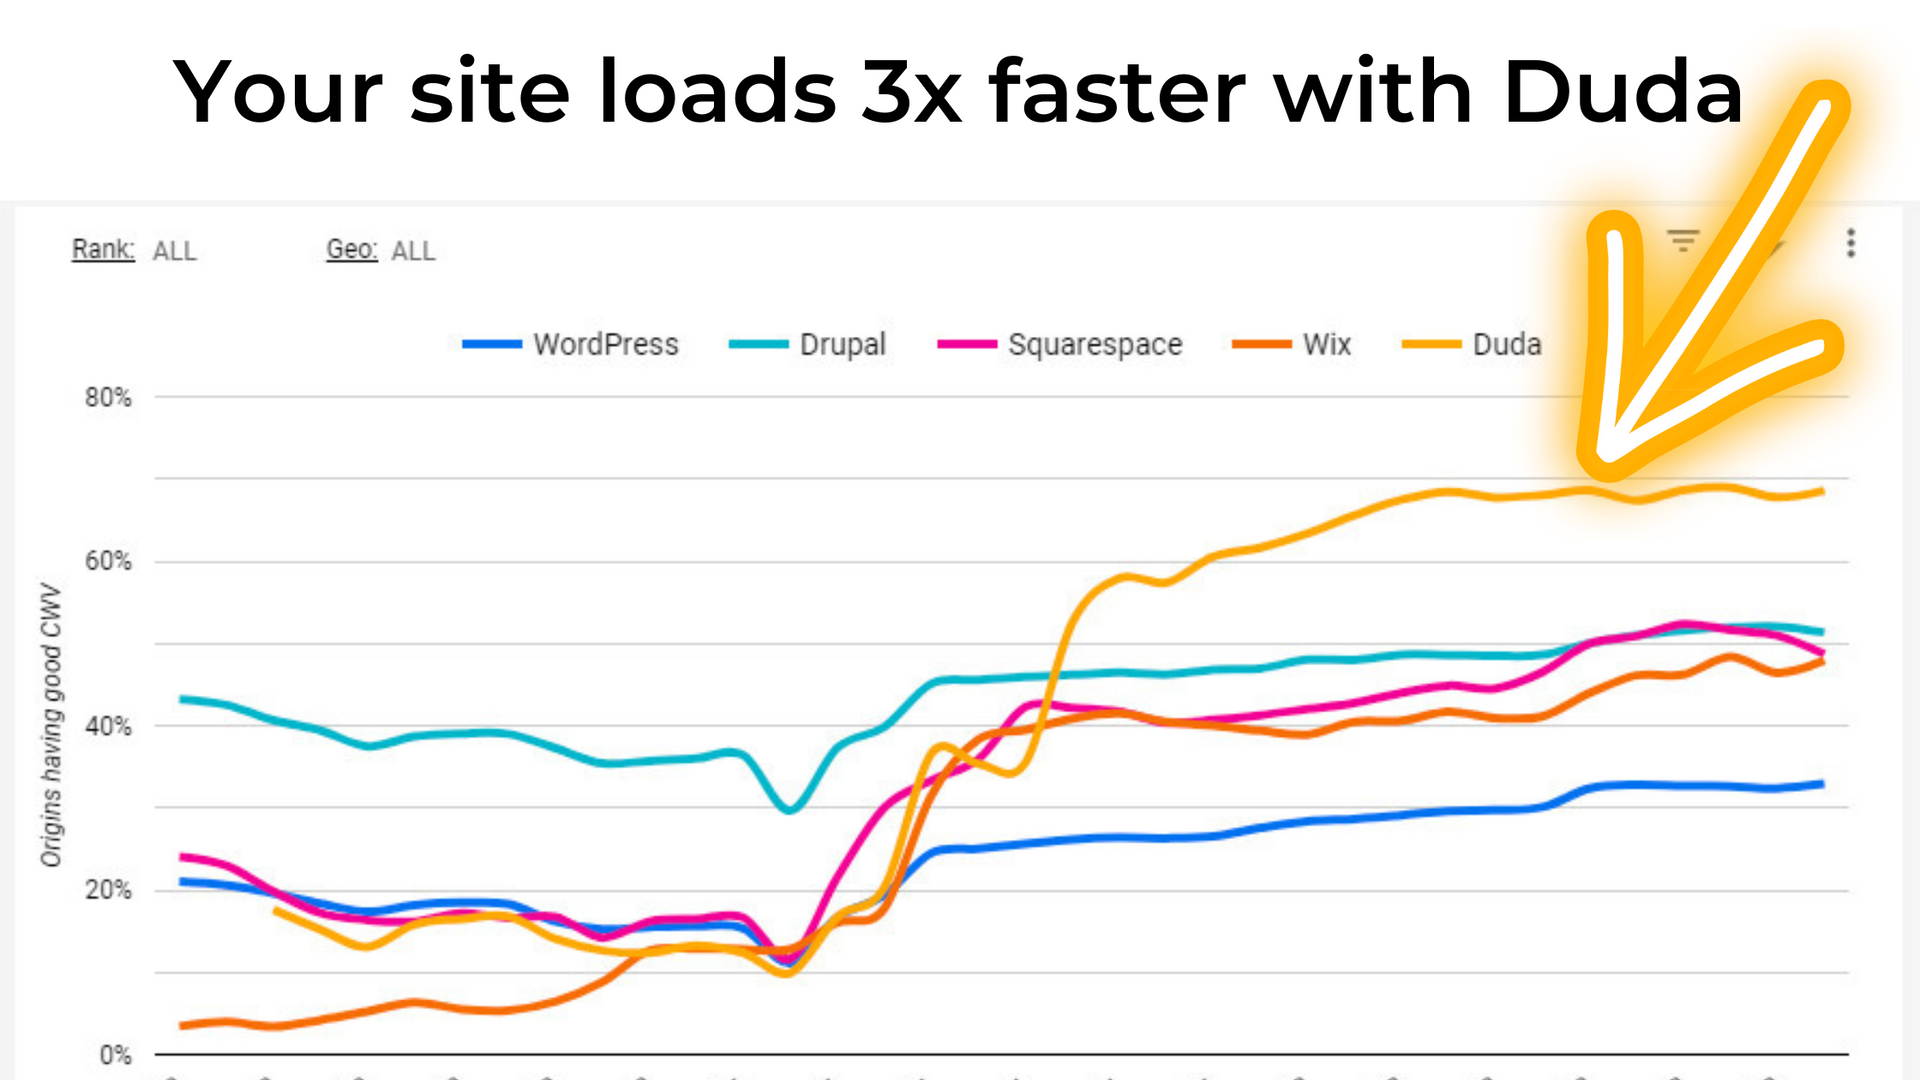 Your site loads 3x faster with Duda